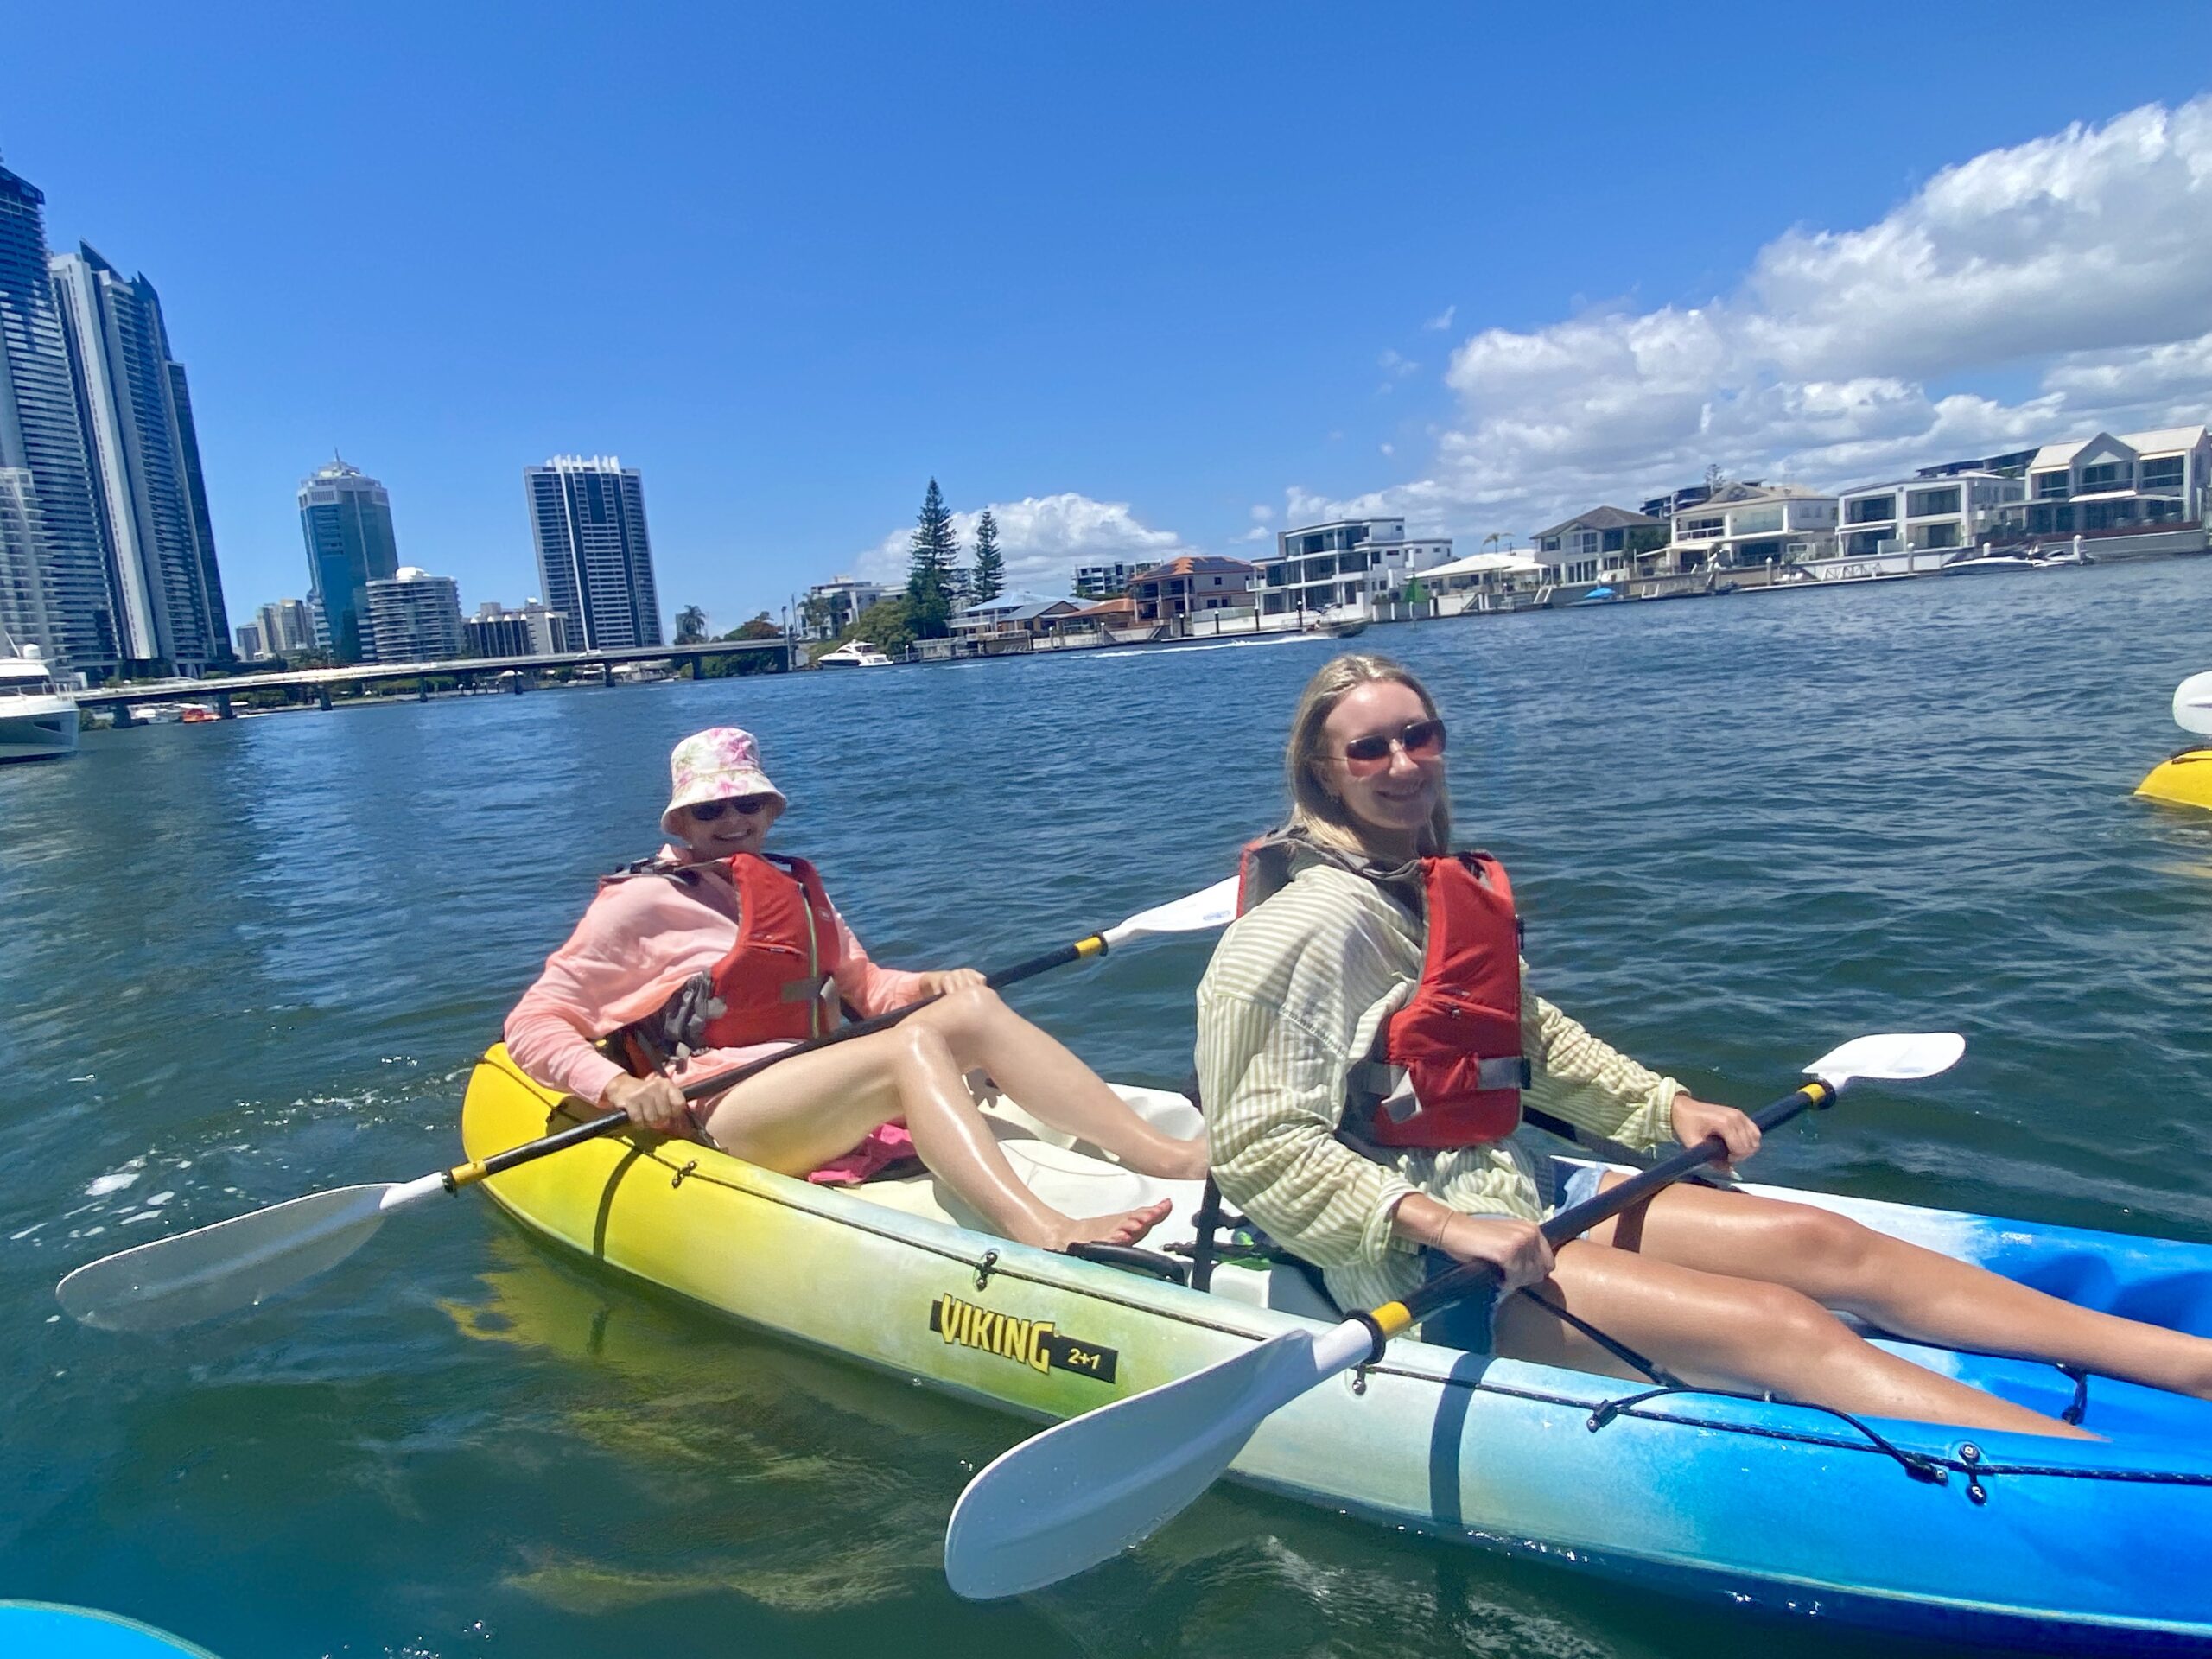 Kayak Hire Double seated  - Select The Amount of Participants You Will Bring